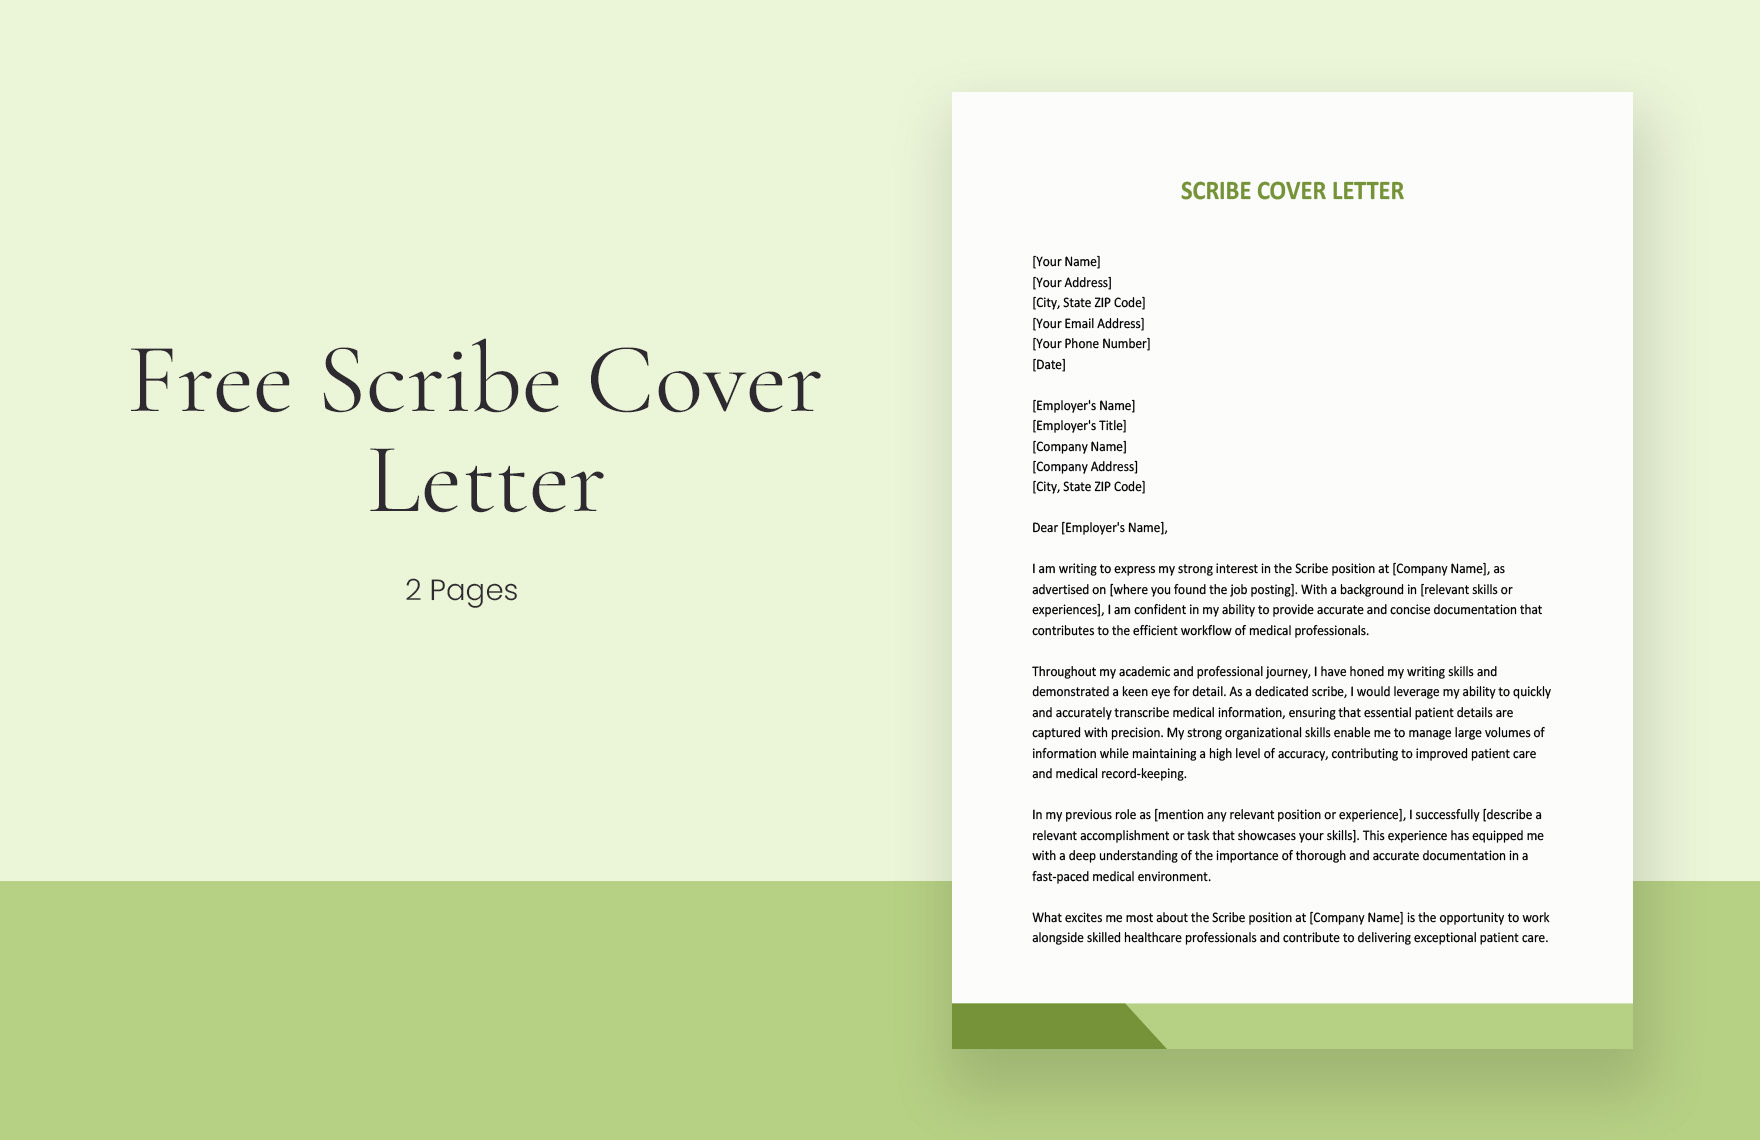 Scribe Cover Letter in Word, Google Docs